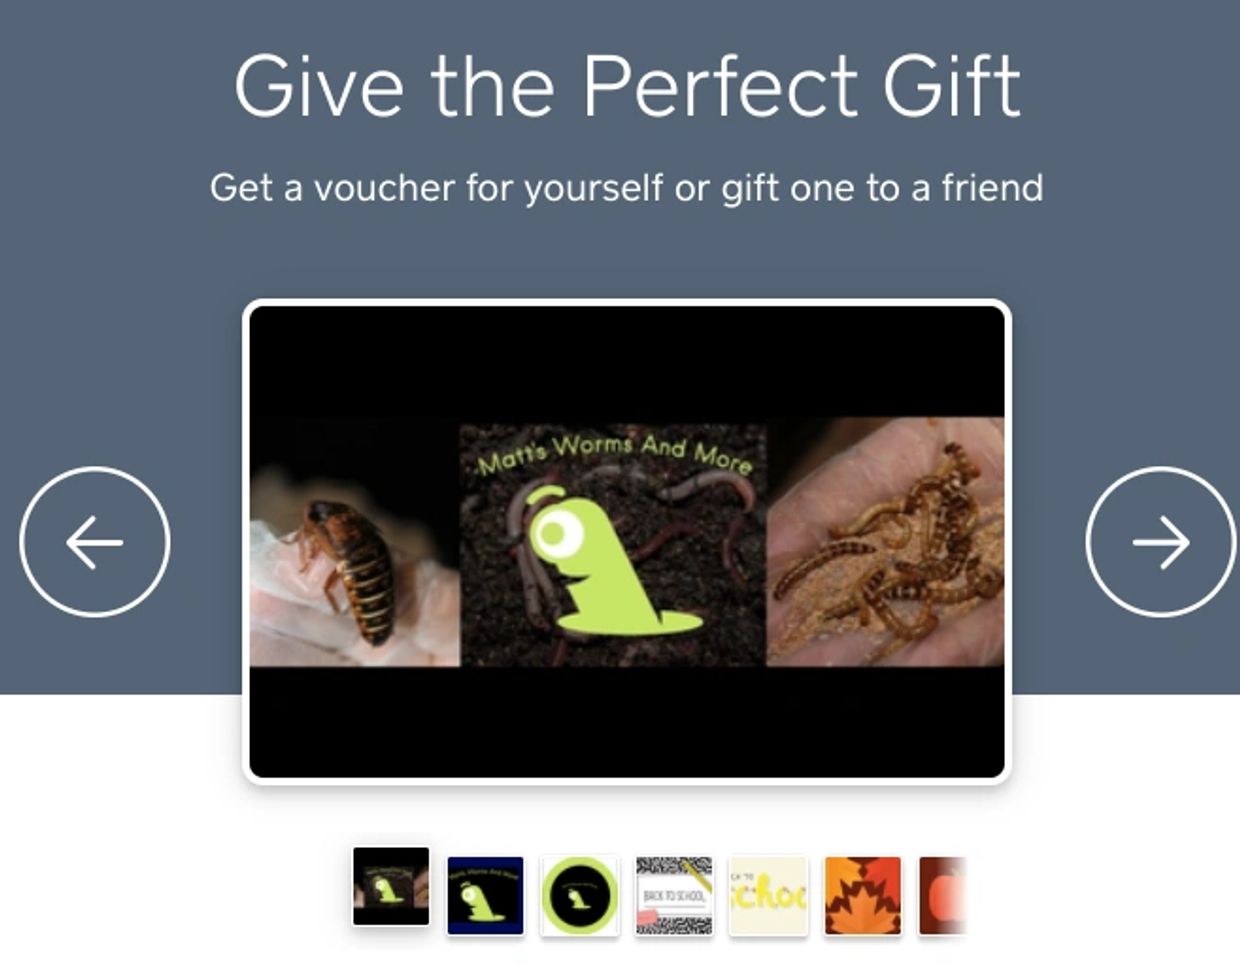 Matt's Worms And More Gift Cards
Dubia Roaches, Worms, Superworms, Waxworms, Hornworms